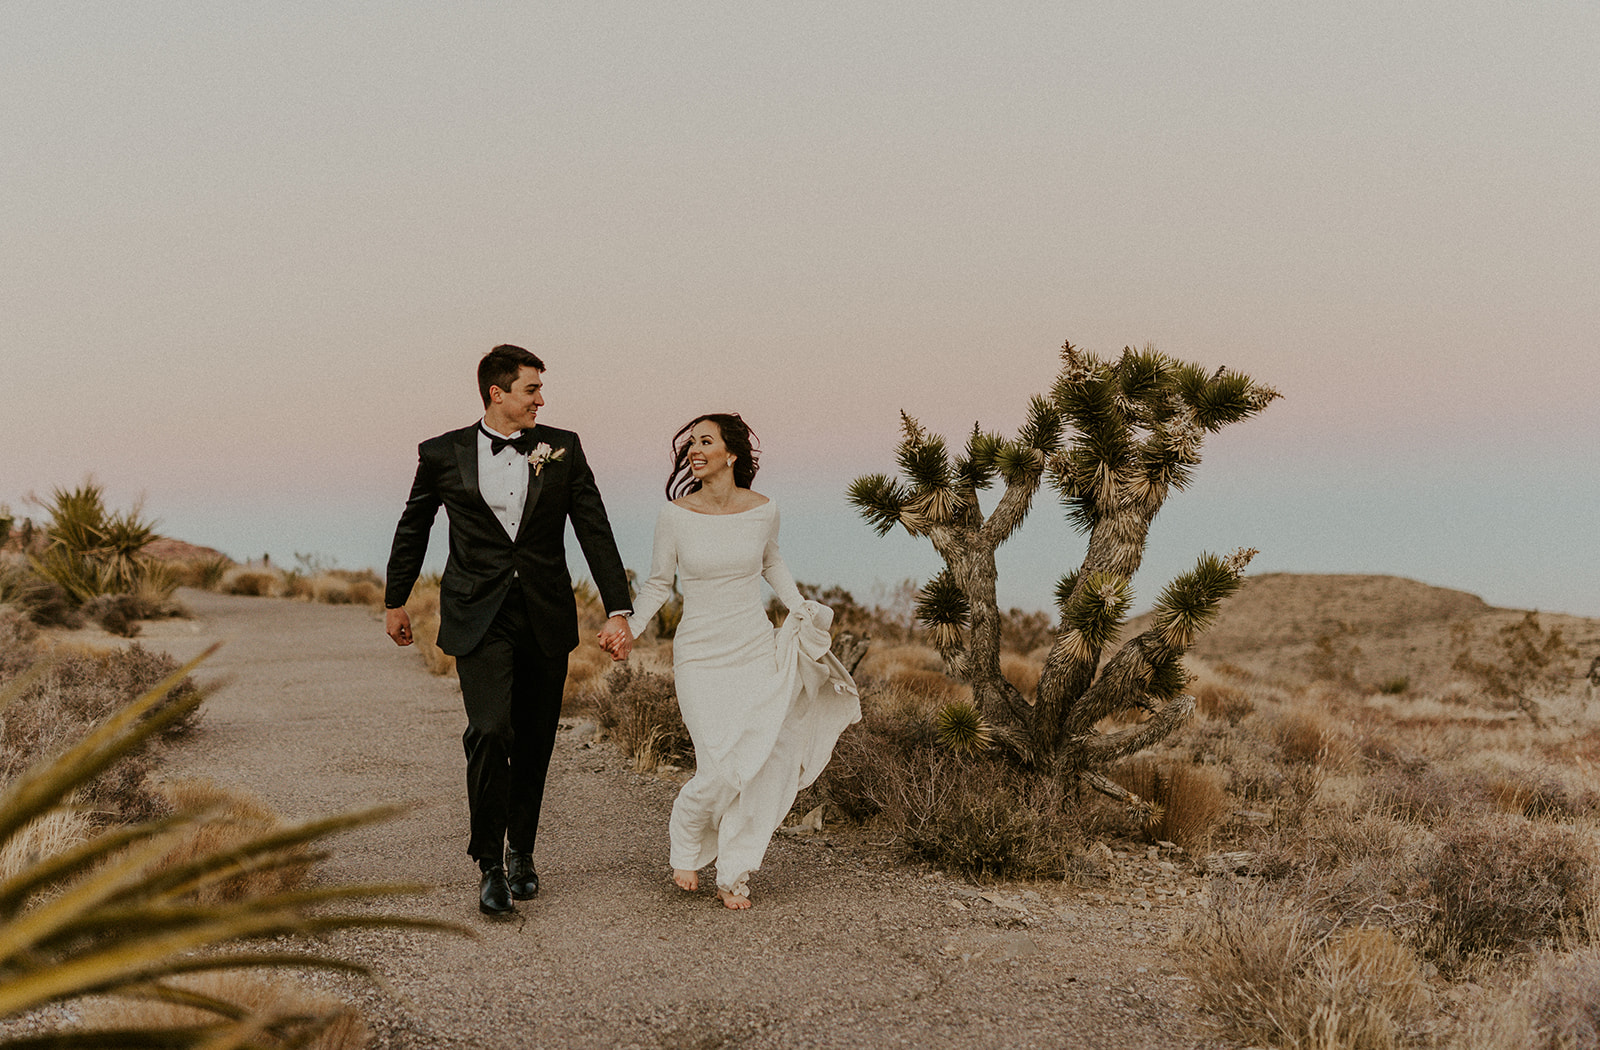 Couple smiling at each other as they hold hands while walking during their Las Vegas wedding shoot